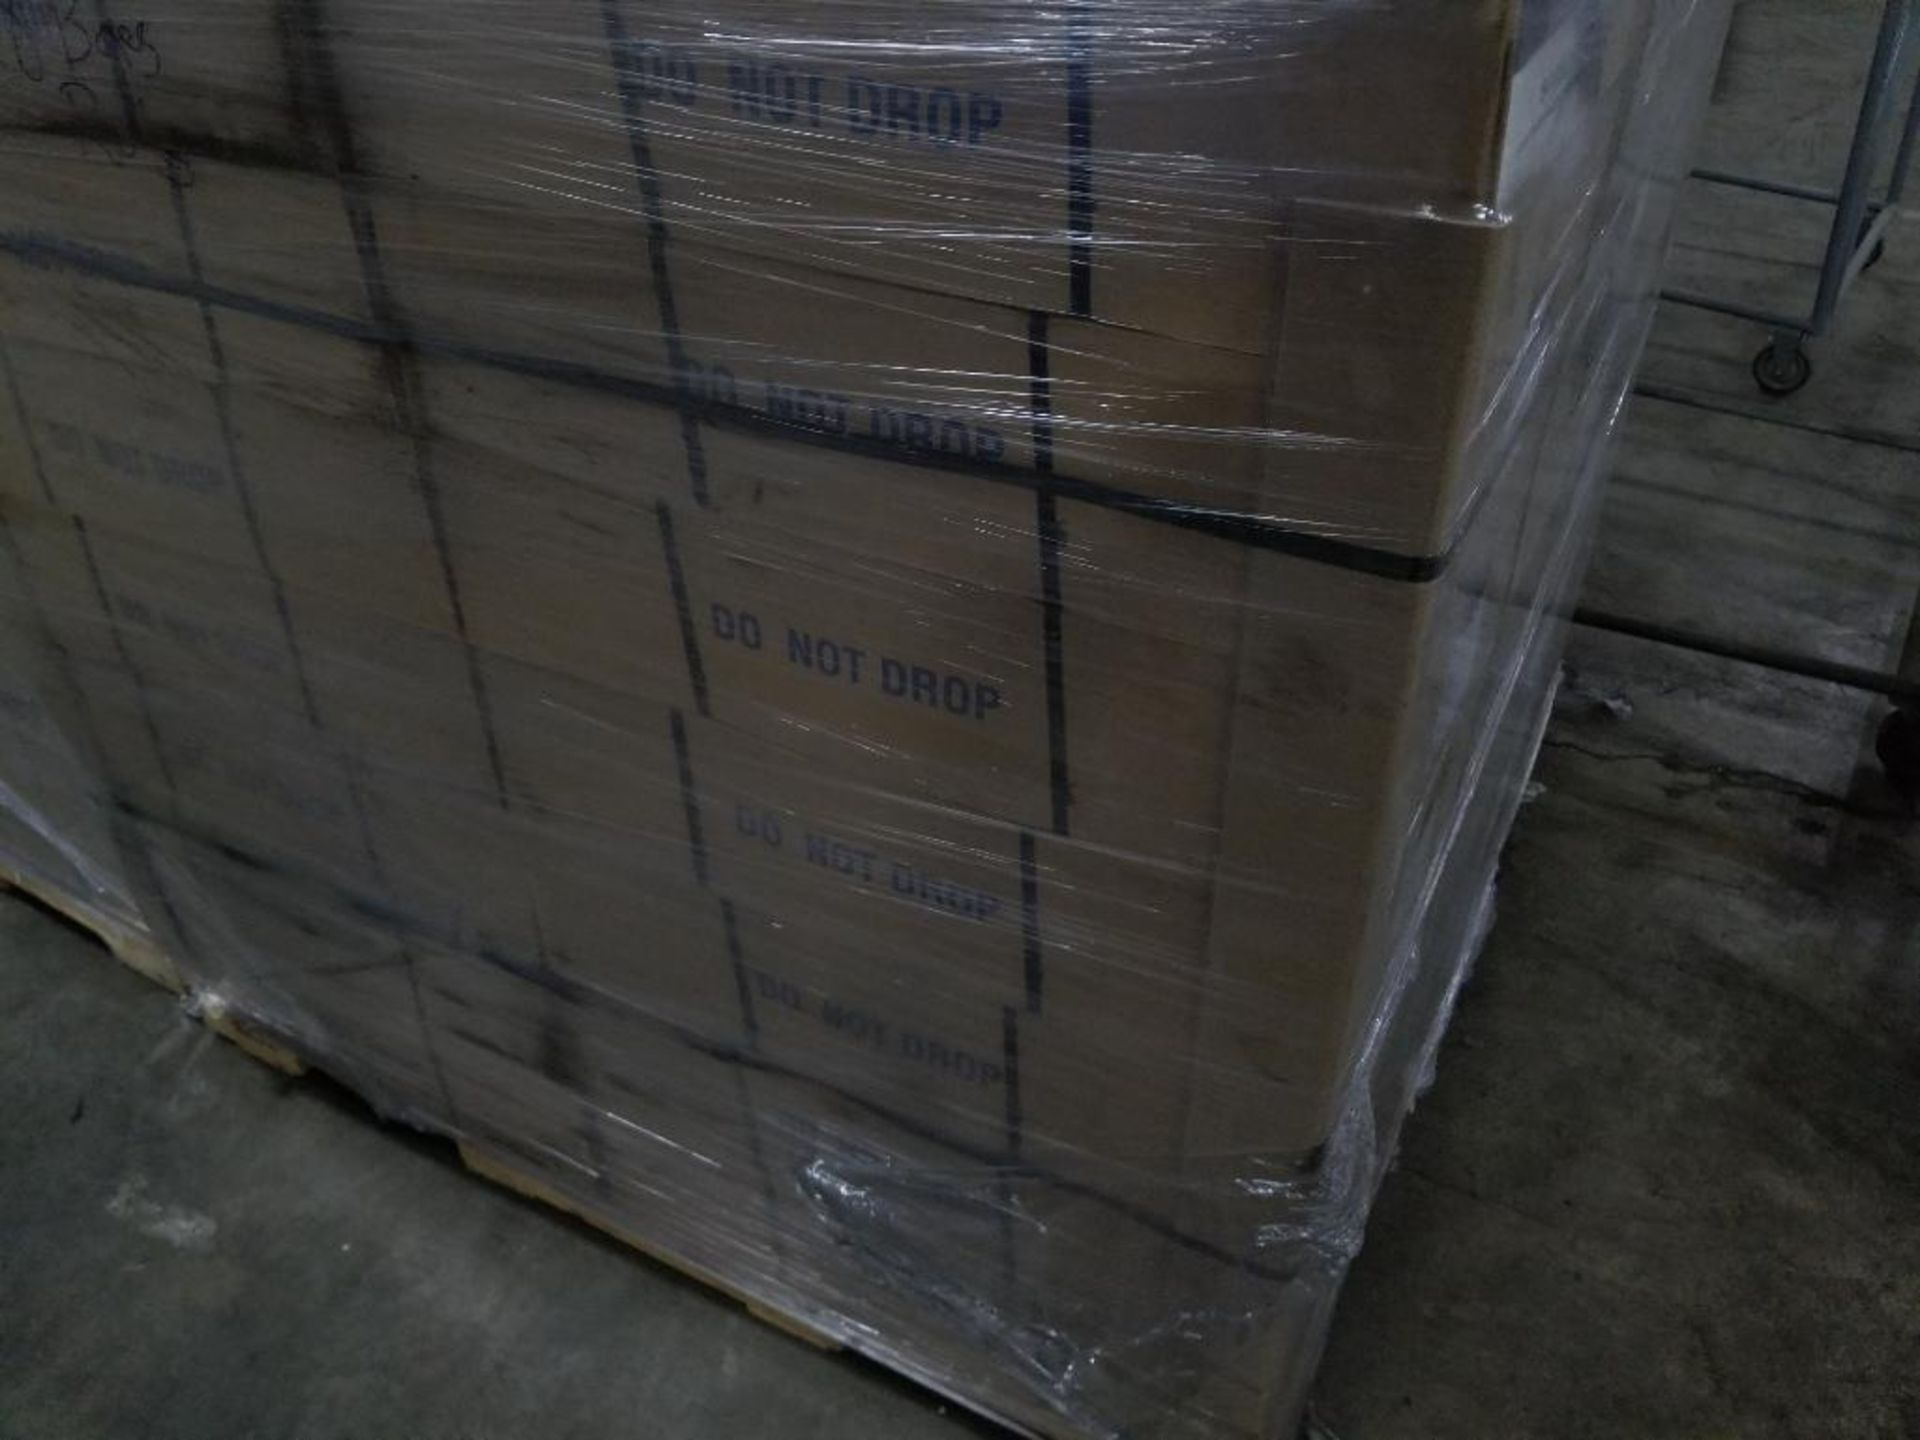 Qty 7 - Uline poly strapping boxes. Model S-1550.